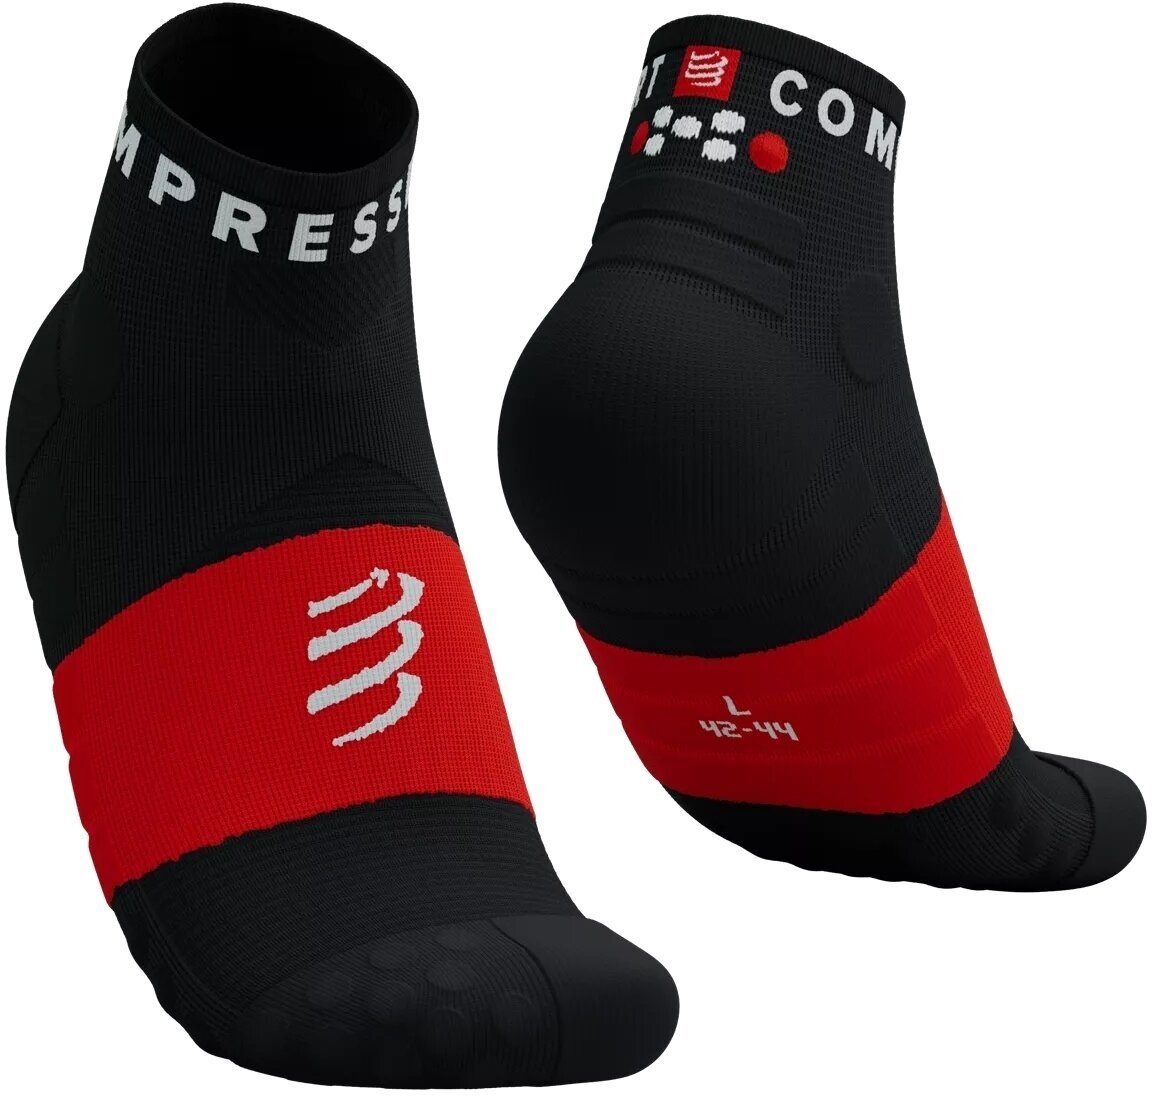 Calcetines para correr Compressport Ultra Trail Low Socks Black/White/Core Red T1 Calcetines para correr